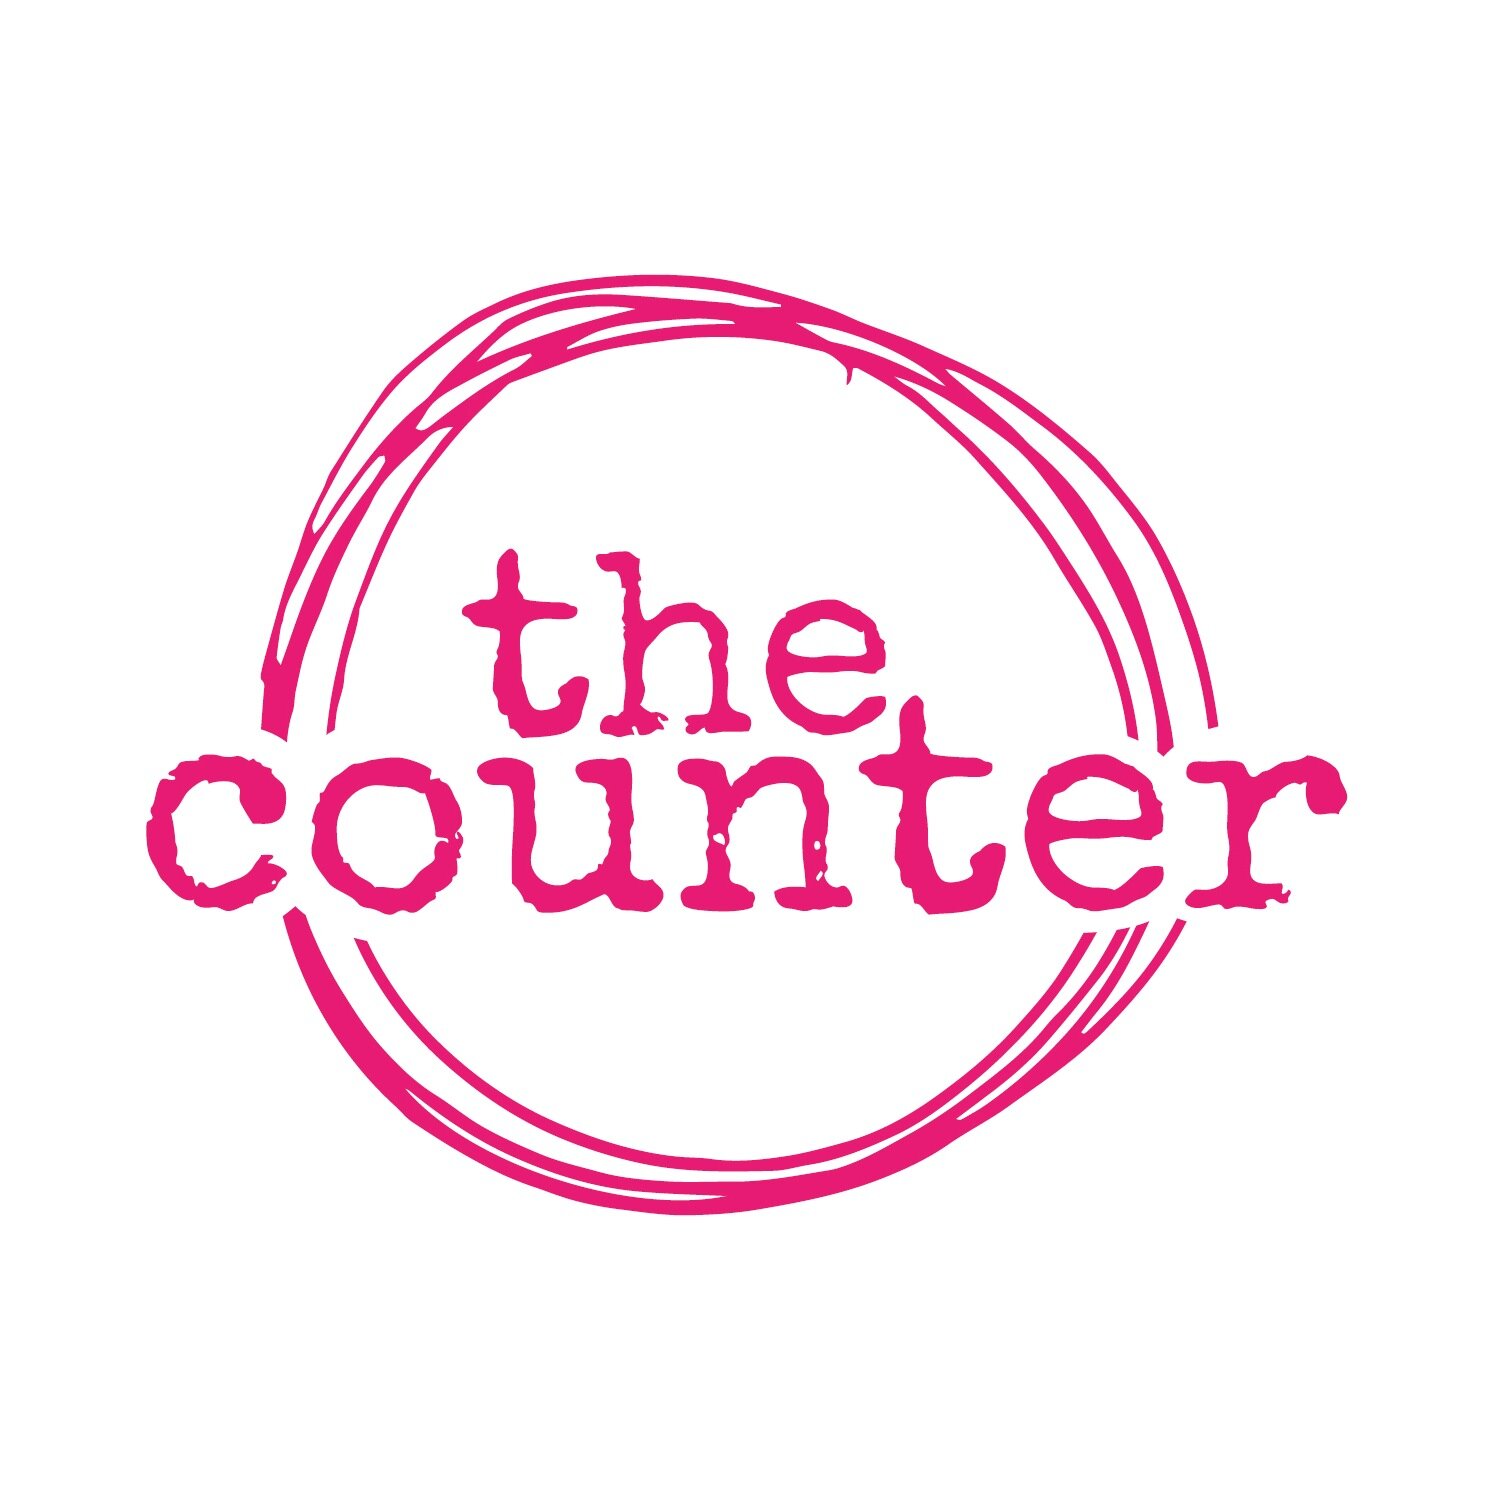 Small-batch handmade confectionery - fudge, nougat, brittles and more. Nationwide delivery. Catering. No DM’s. Mail for inquiries: eat@thecounter.co.za.